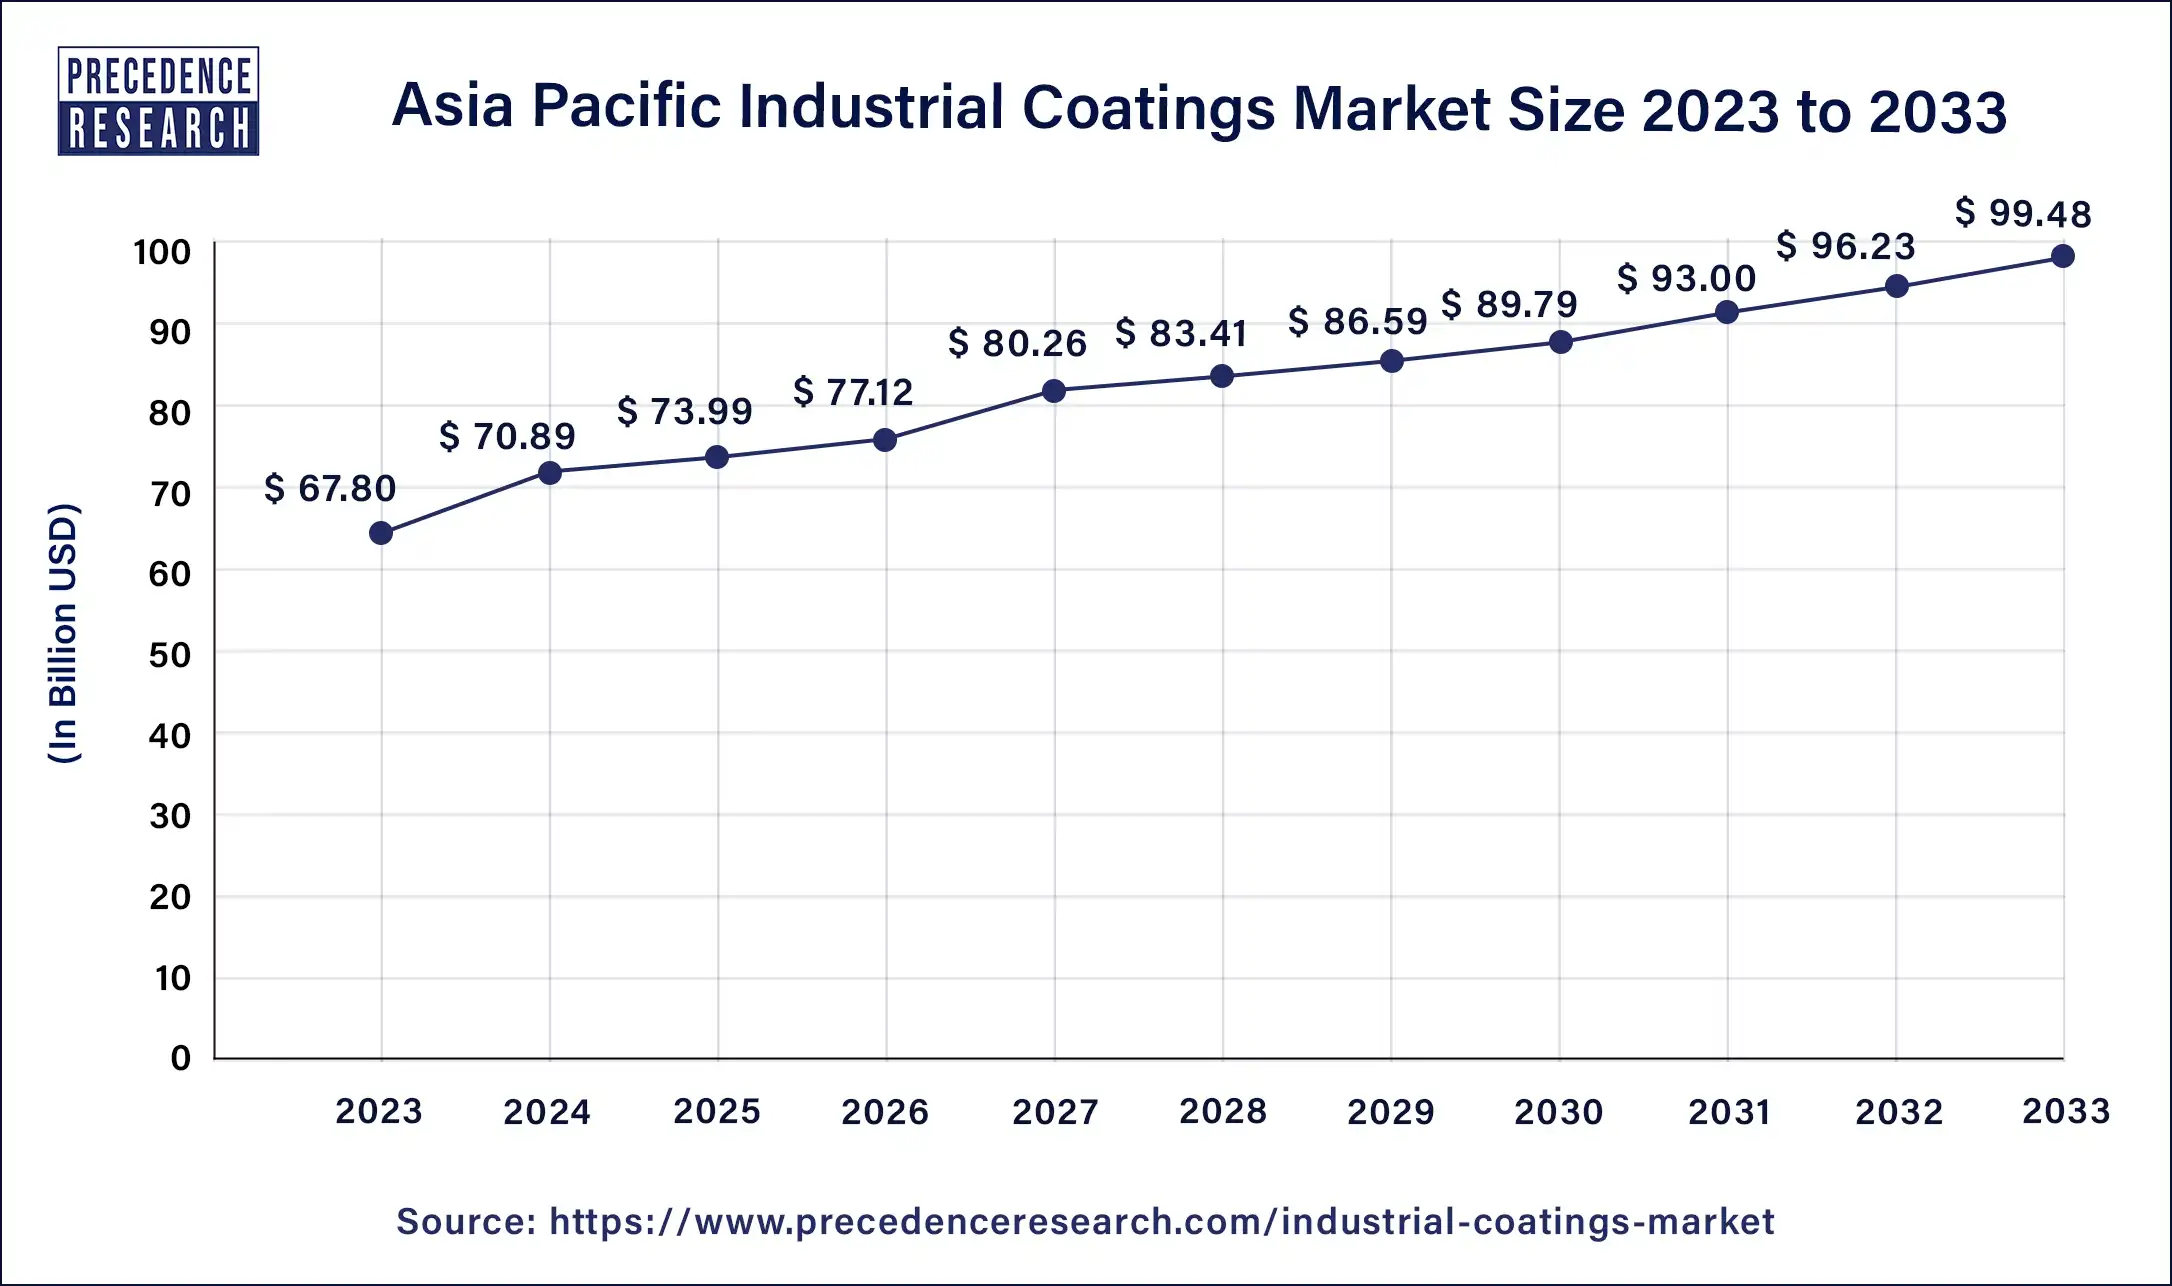 Asia Pacific Industrial Coatings Market Size 2024 to 2033